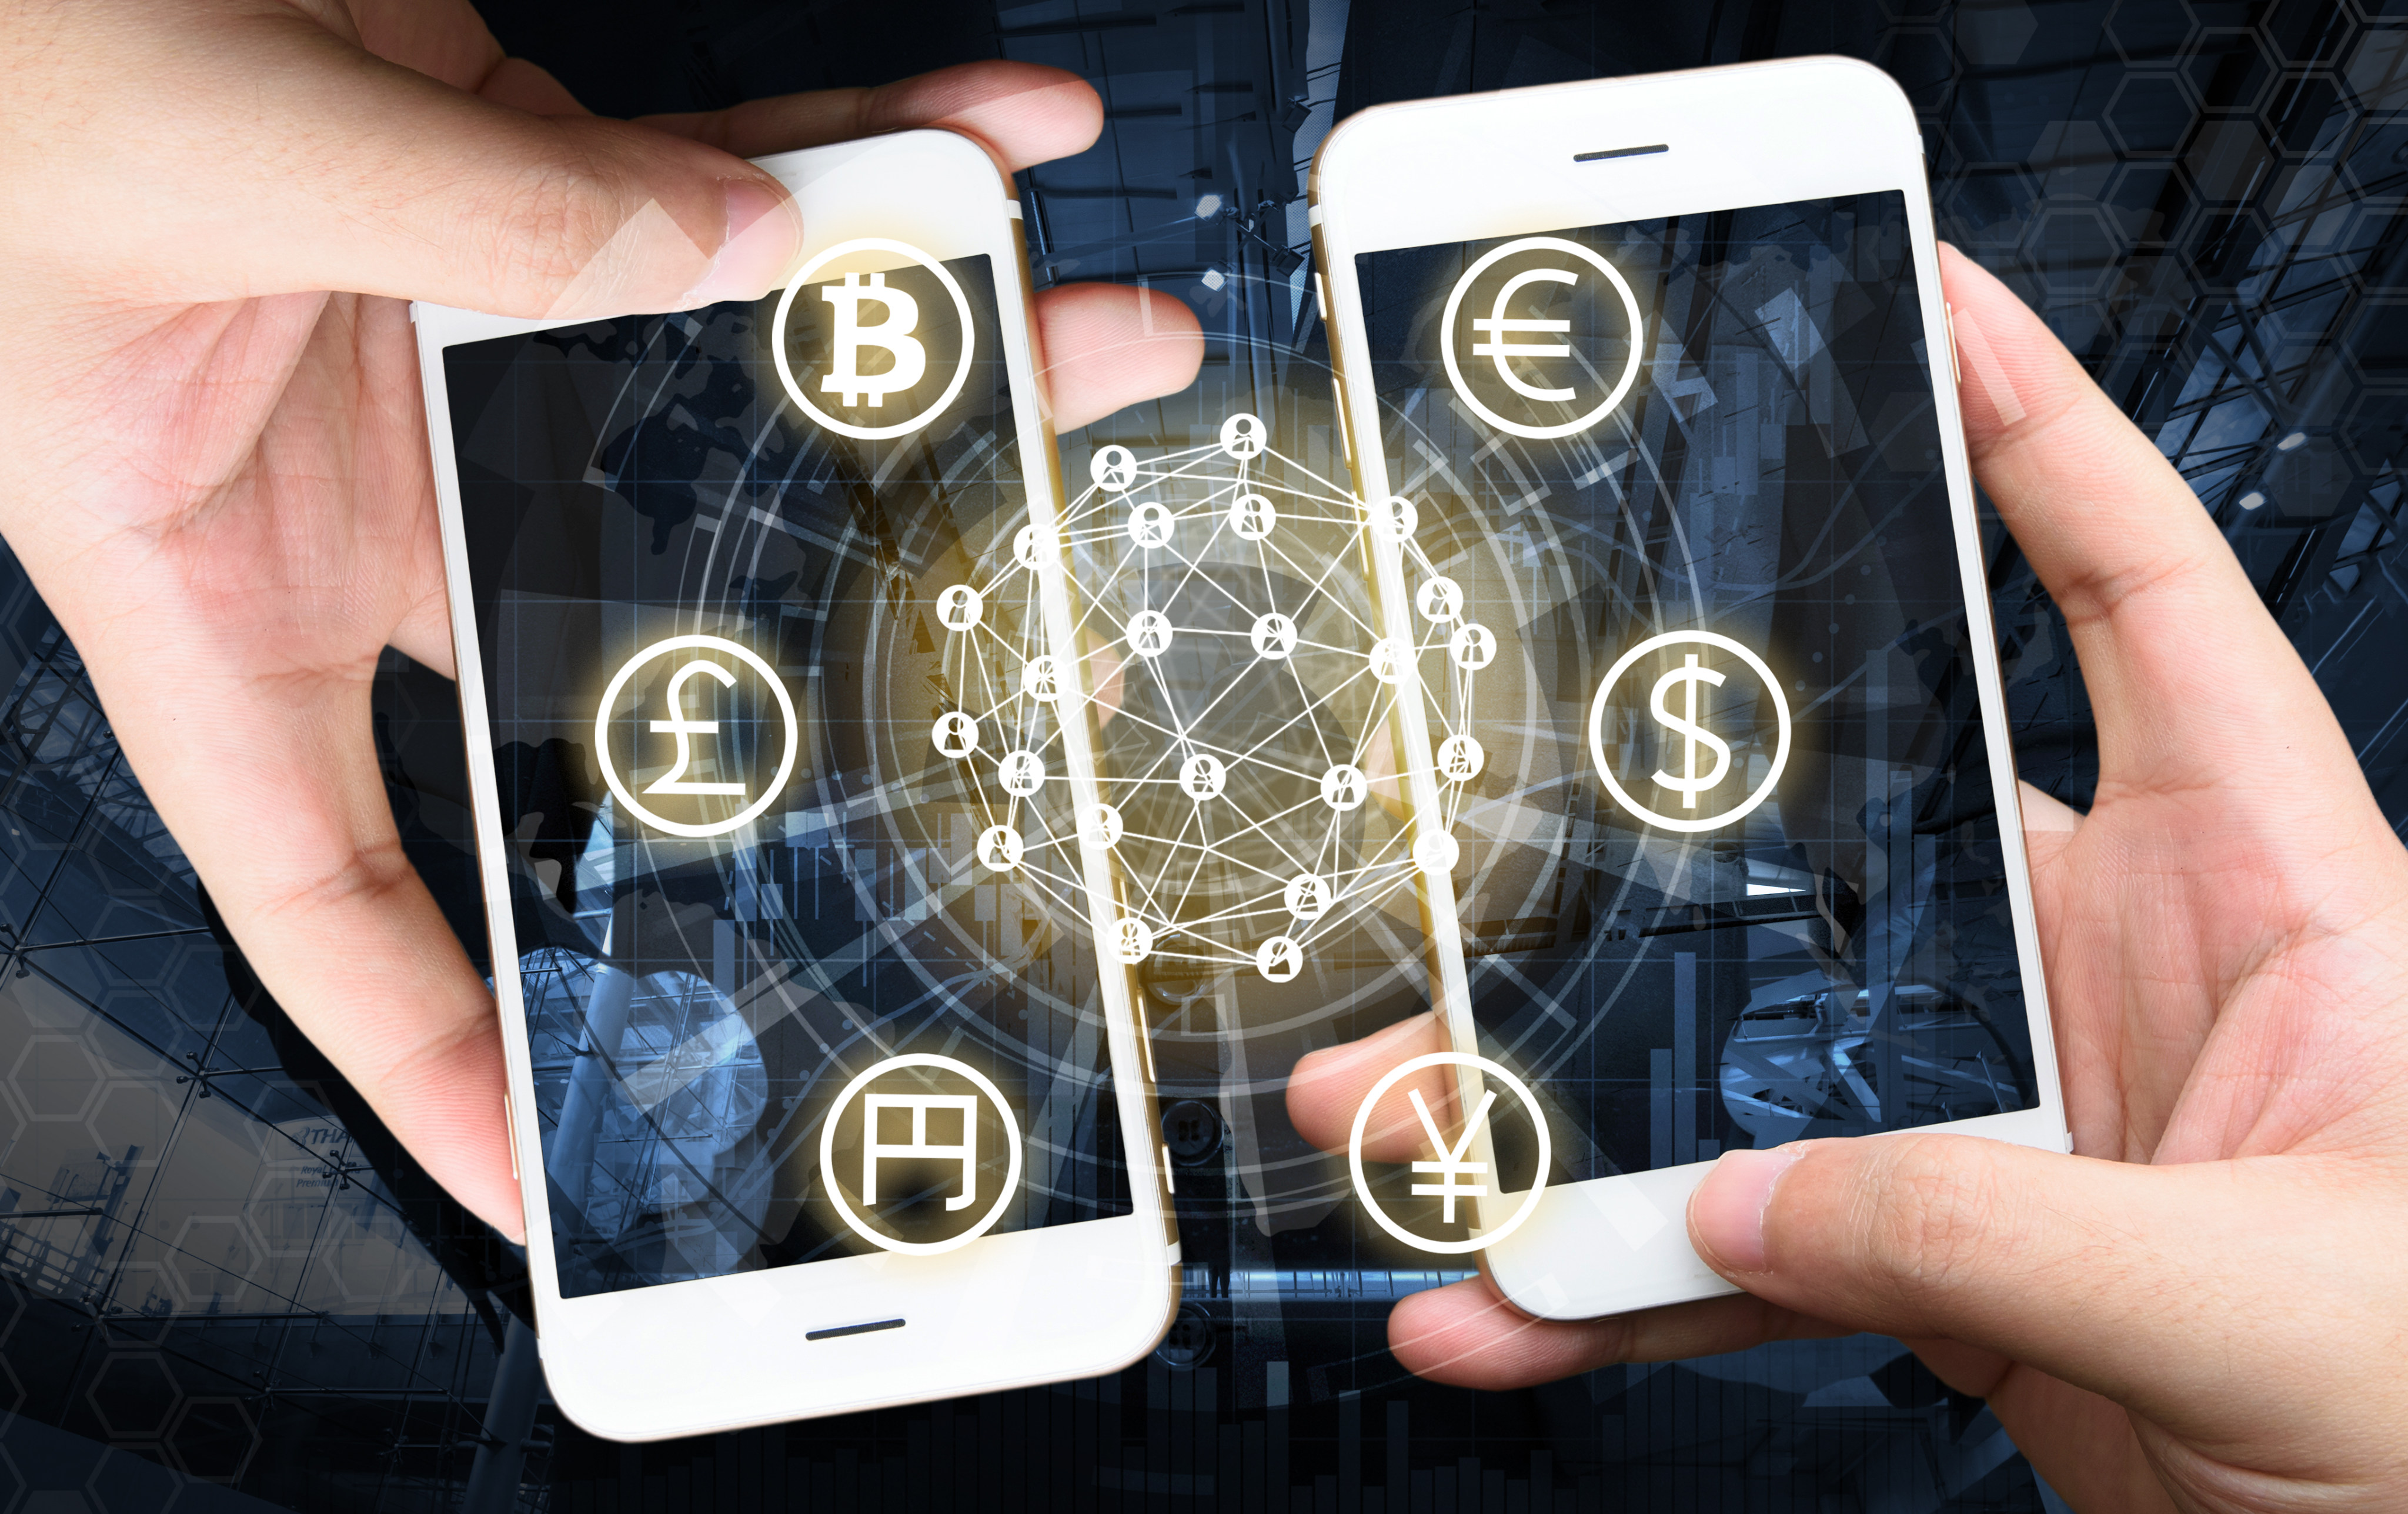 The Commercial Data Interchange is one of the key initiatives under the de facto central bank’s Fintech 2025 strategy. Photo: Shutterstock